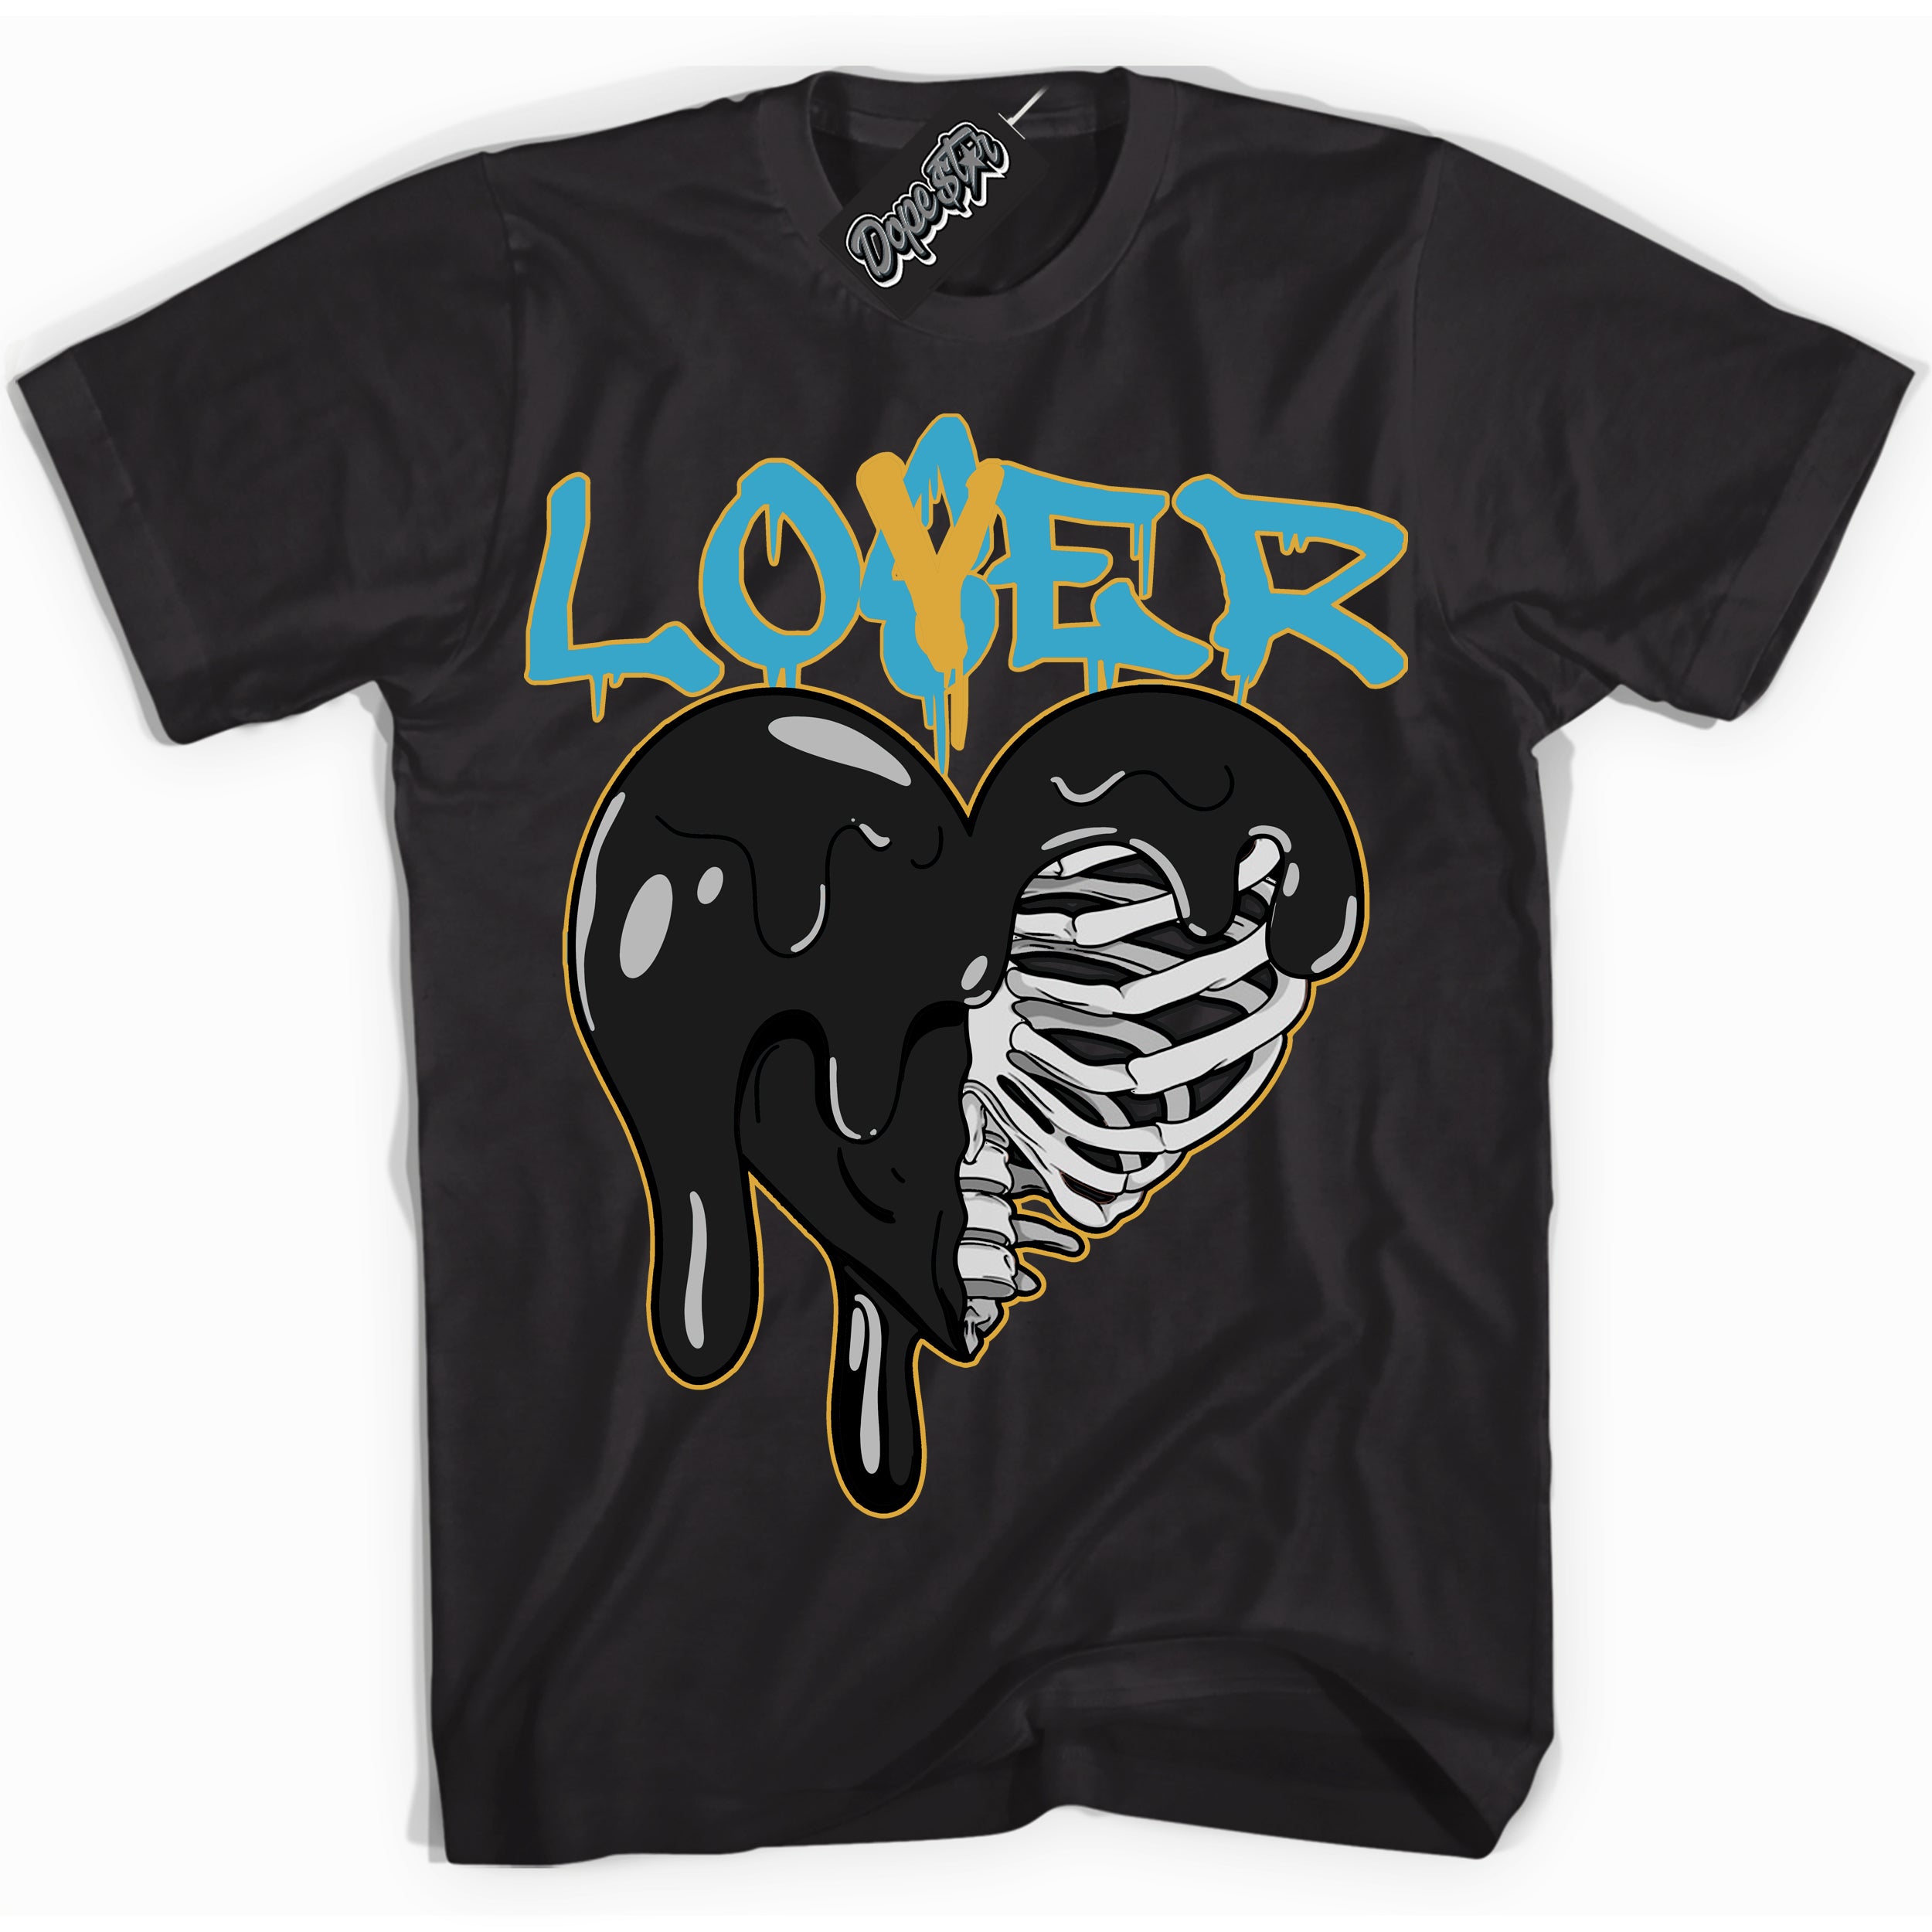 Cool Black Shirt with “ Lover Loser” design that perfectly matches Aqua 5s Sneakers.